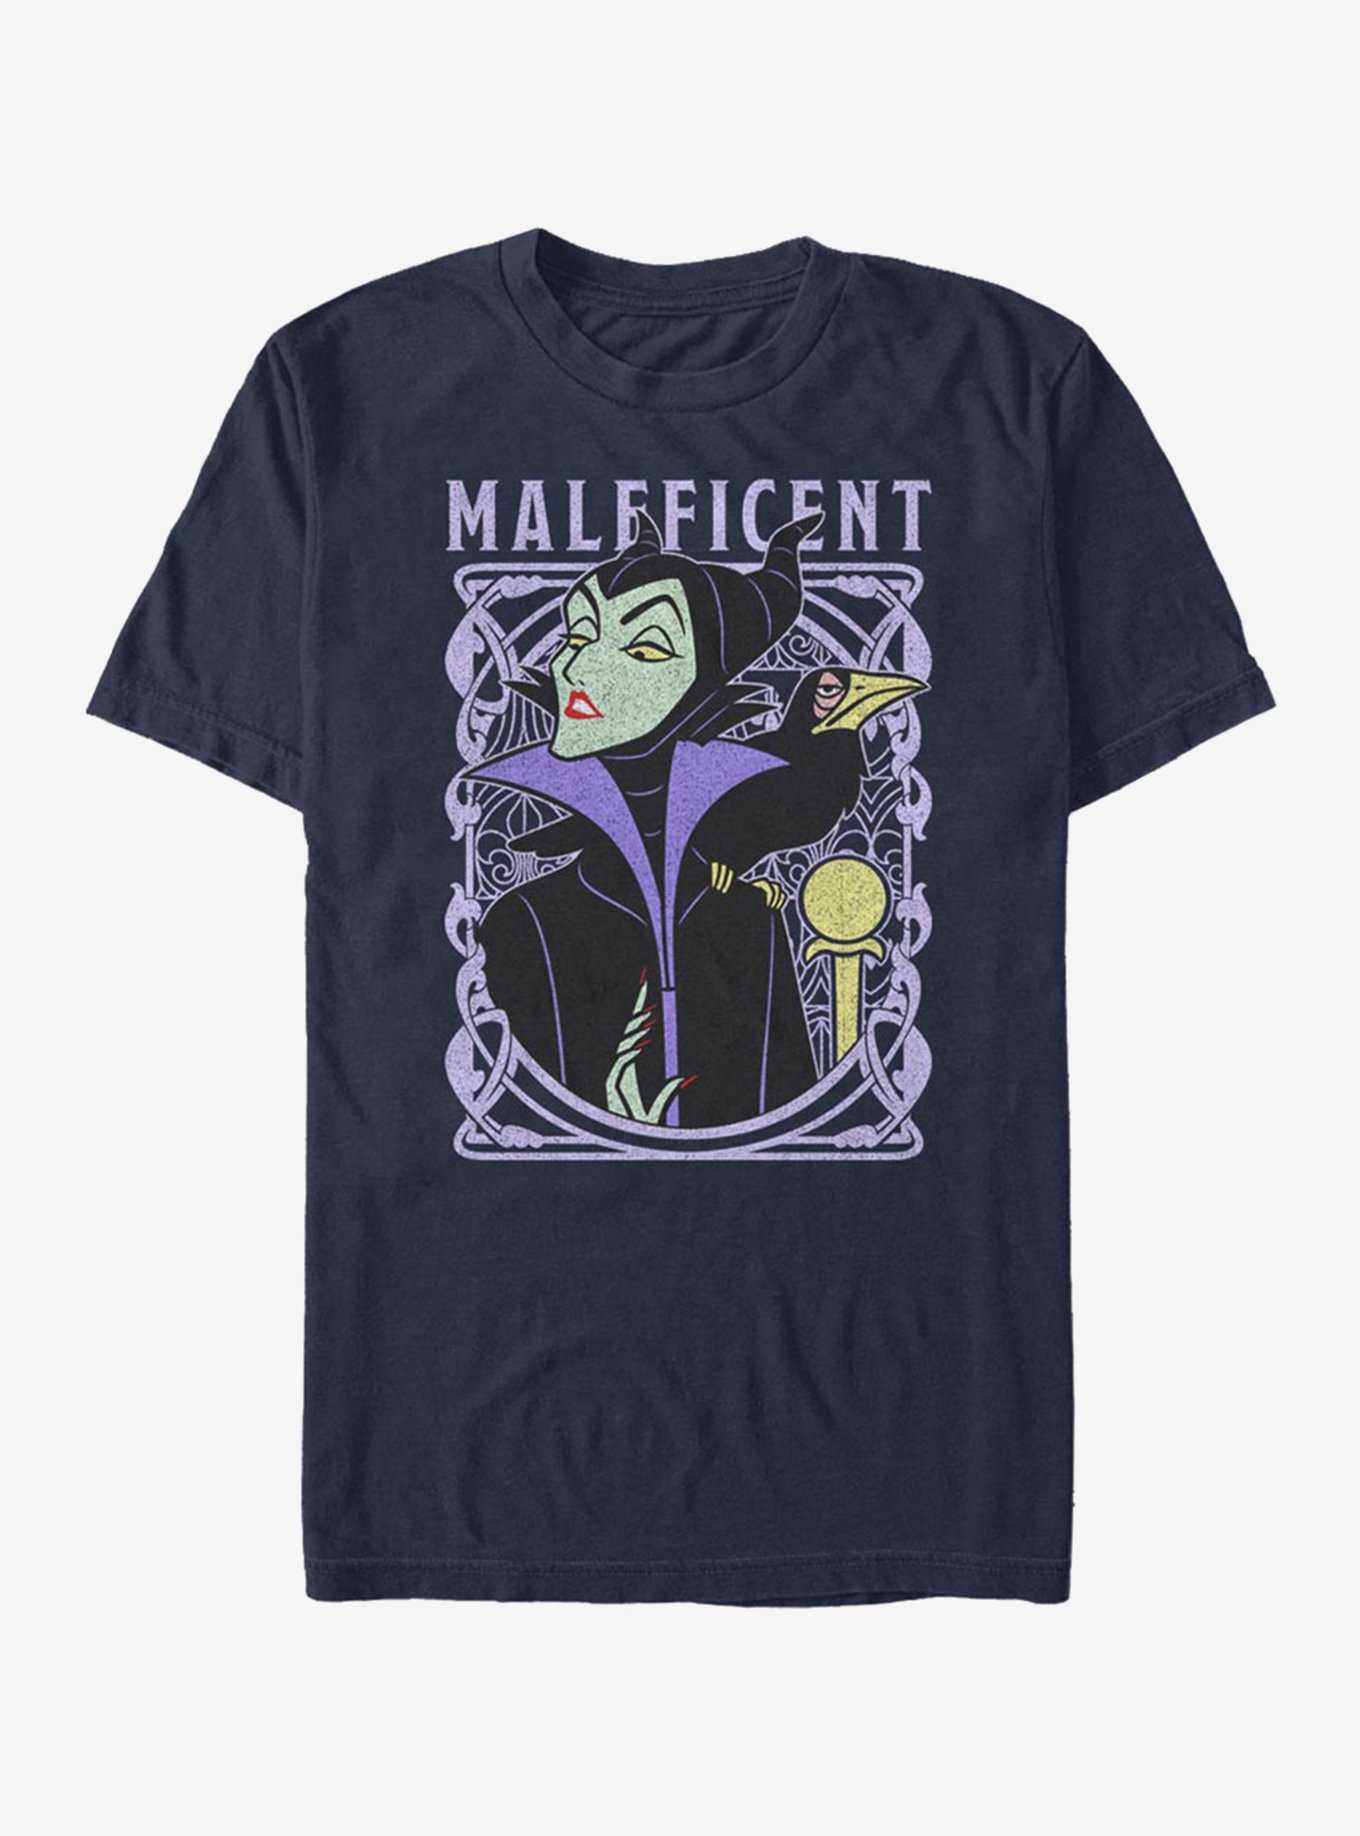 Disney Sleeping Beauty Maleficent Her Excellency T-Shirt, , hi-res